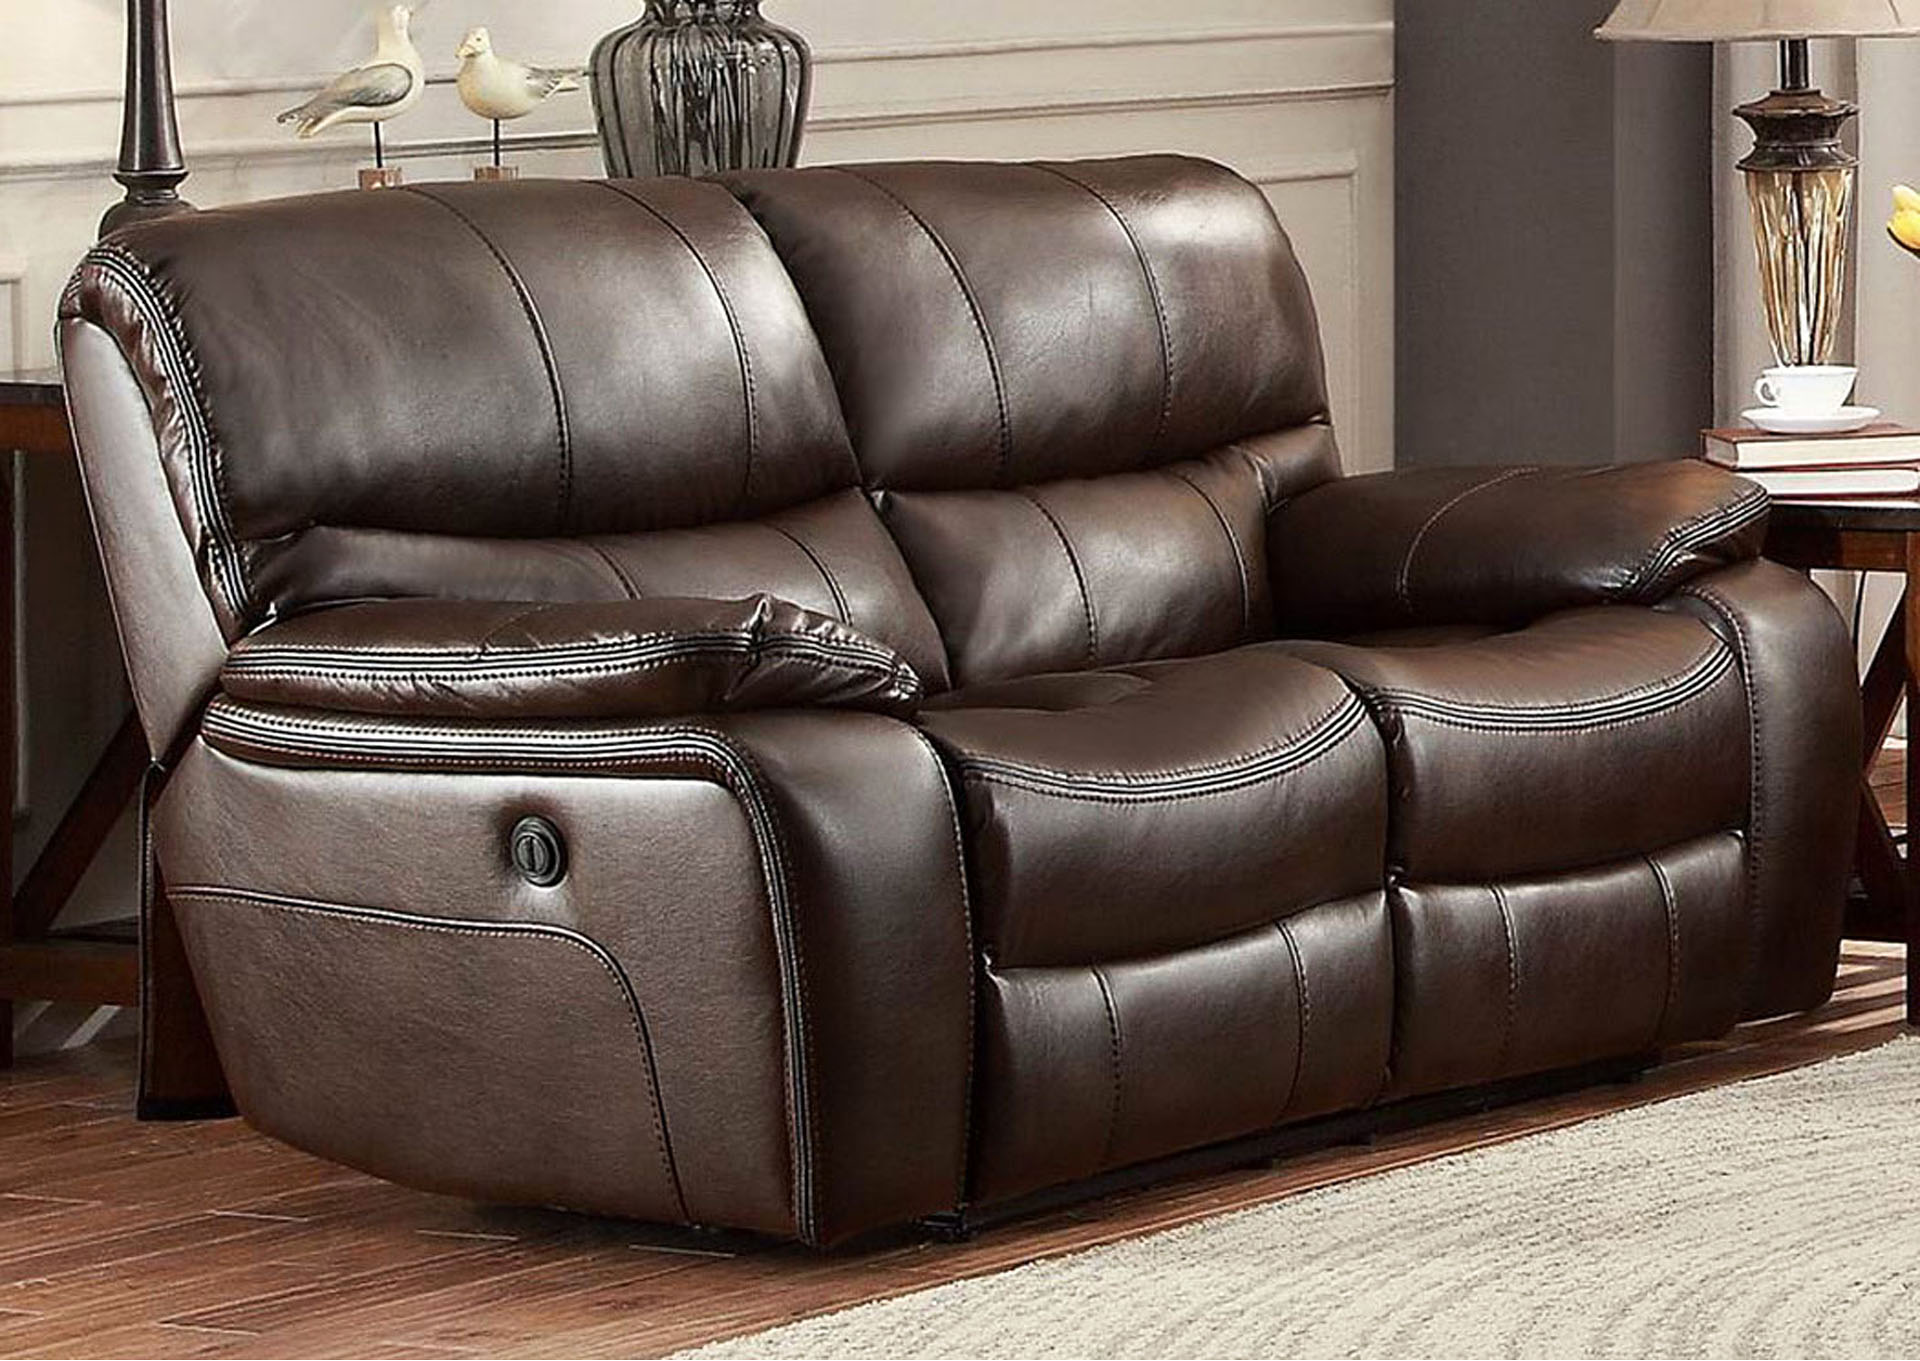 Kids Brown Leather Chair - ohmyworddd